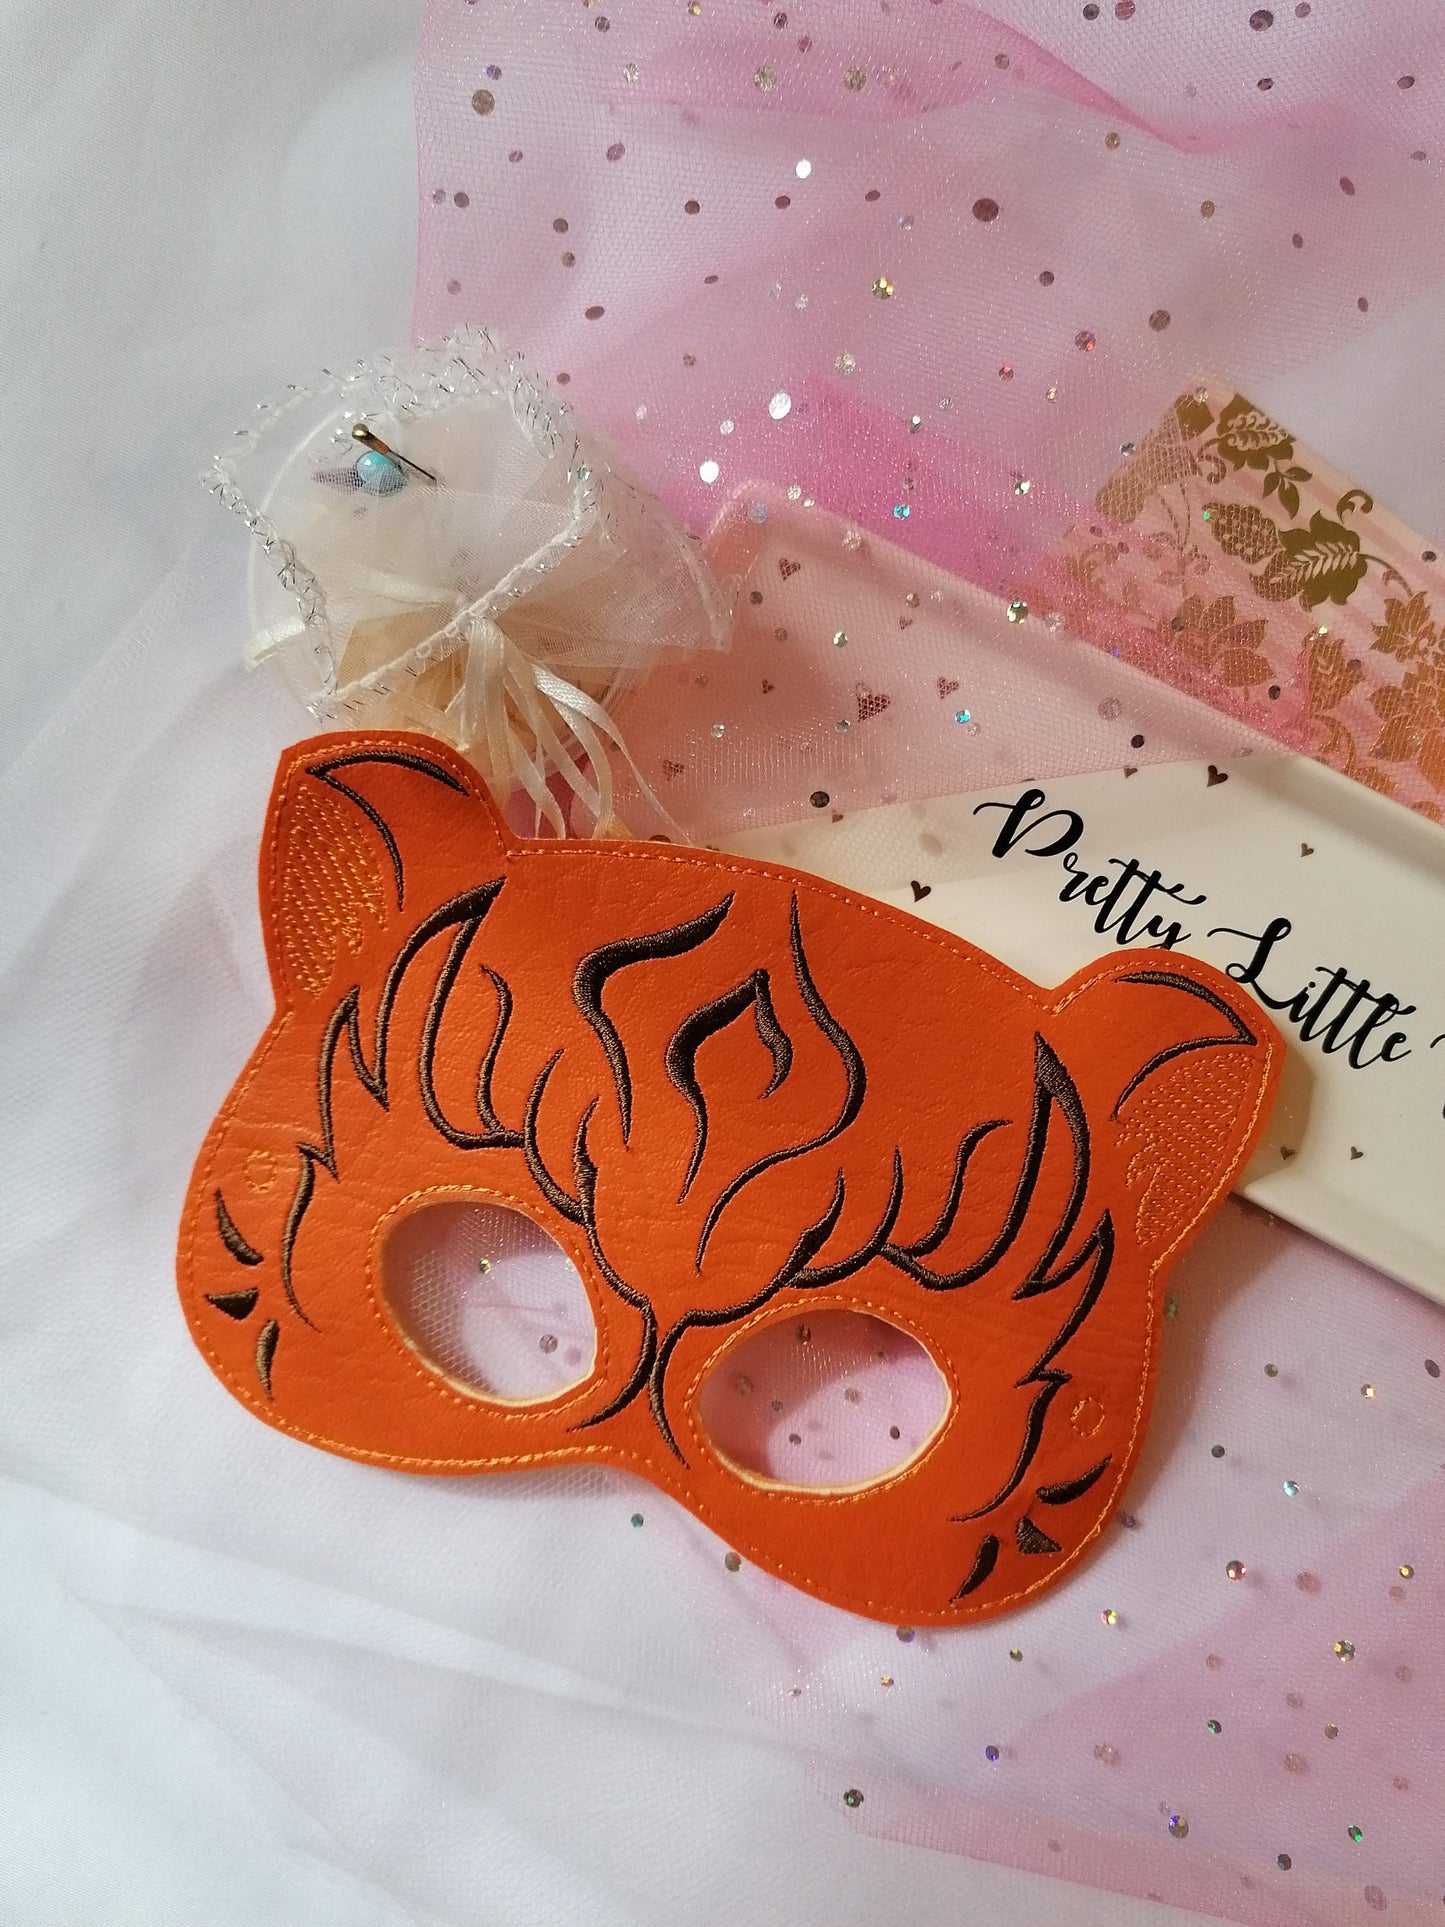 Tiger mask,Kids Mask, Embroidery orange vinyl backed with acrylic felt. birthday Mask, Party dress-up Mask, Fun play costume for kids.